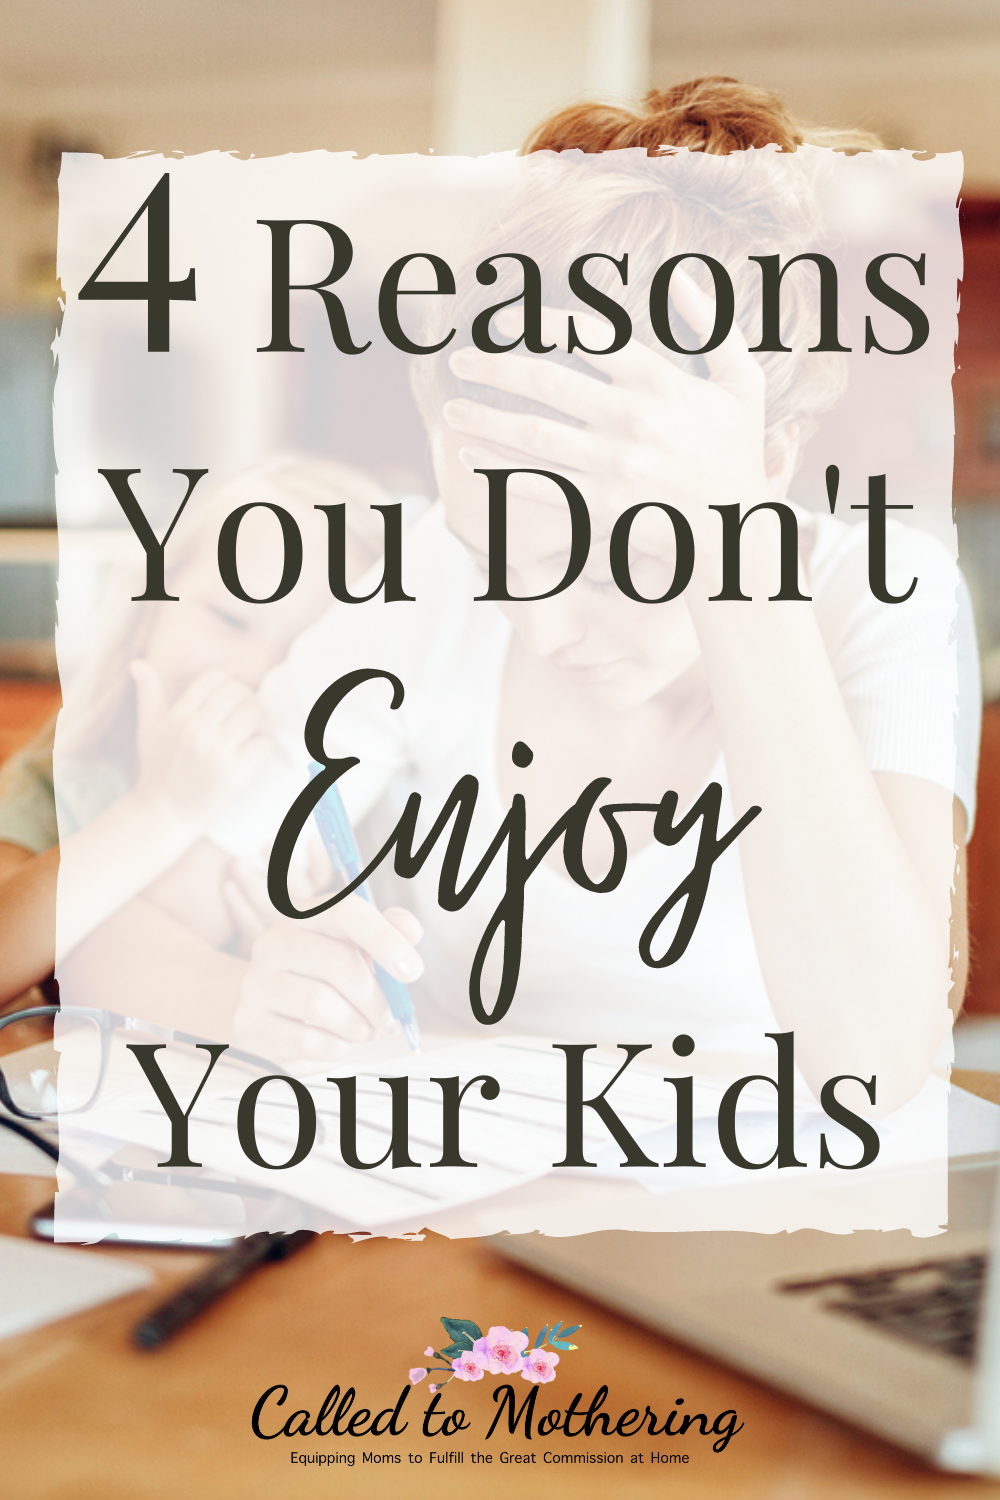 Do you feel like you're missing out on the joy of motherhood? Here are 4 reasons that contribute to negative feelings about your kids and tips for enjoying them again! #momhacks #momencouragement #enjoyyourkids